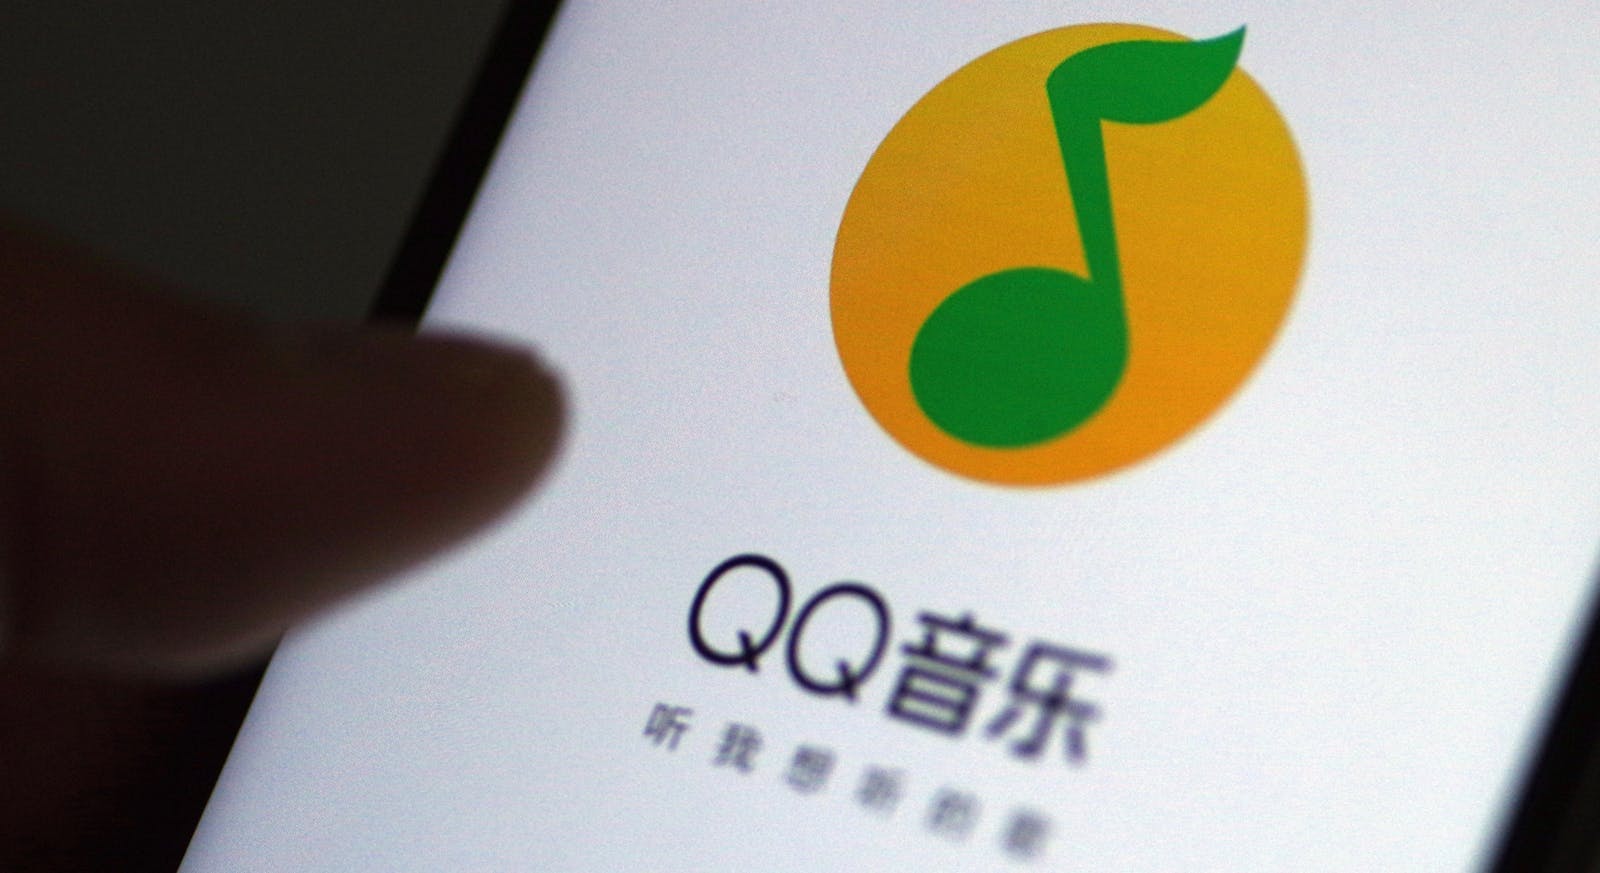 Tencent Music's QQ music streaming app on a phone in China last March. Photo by AP